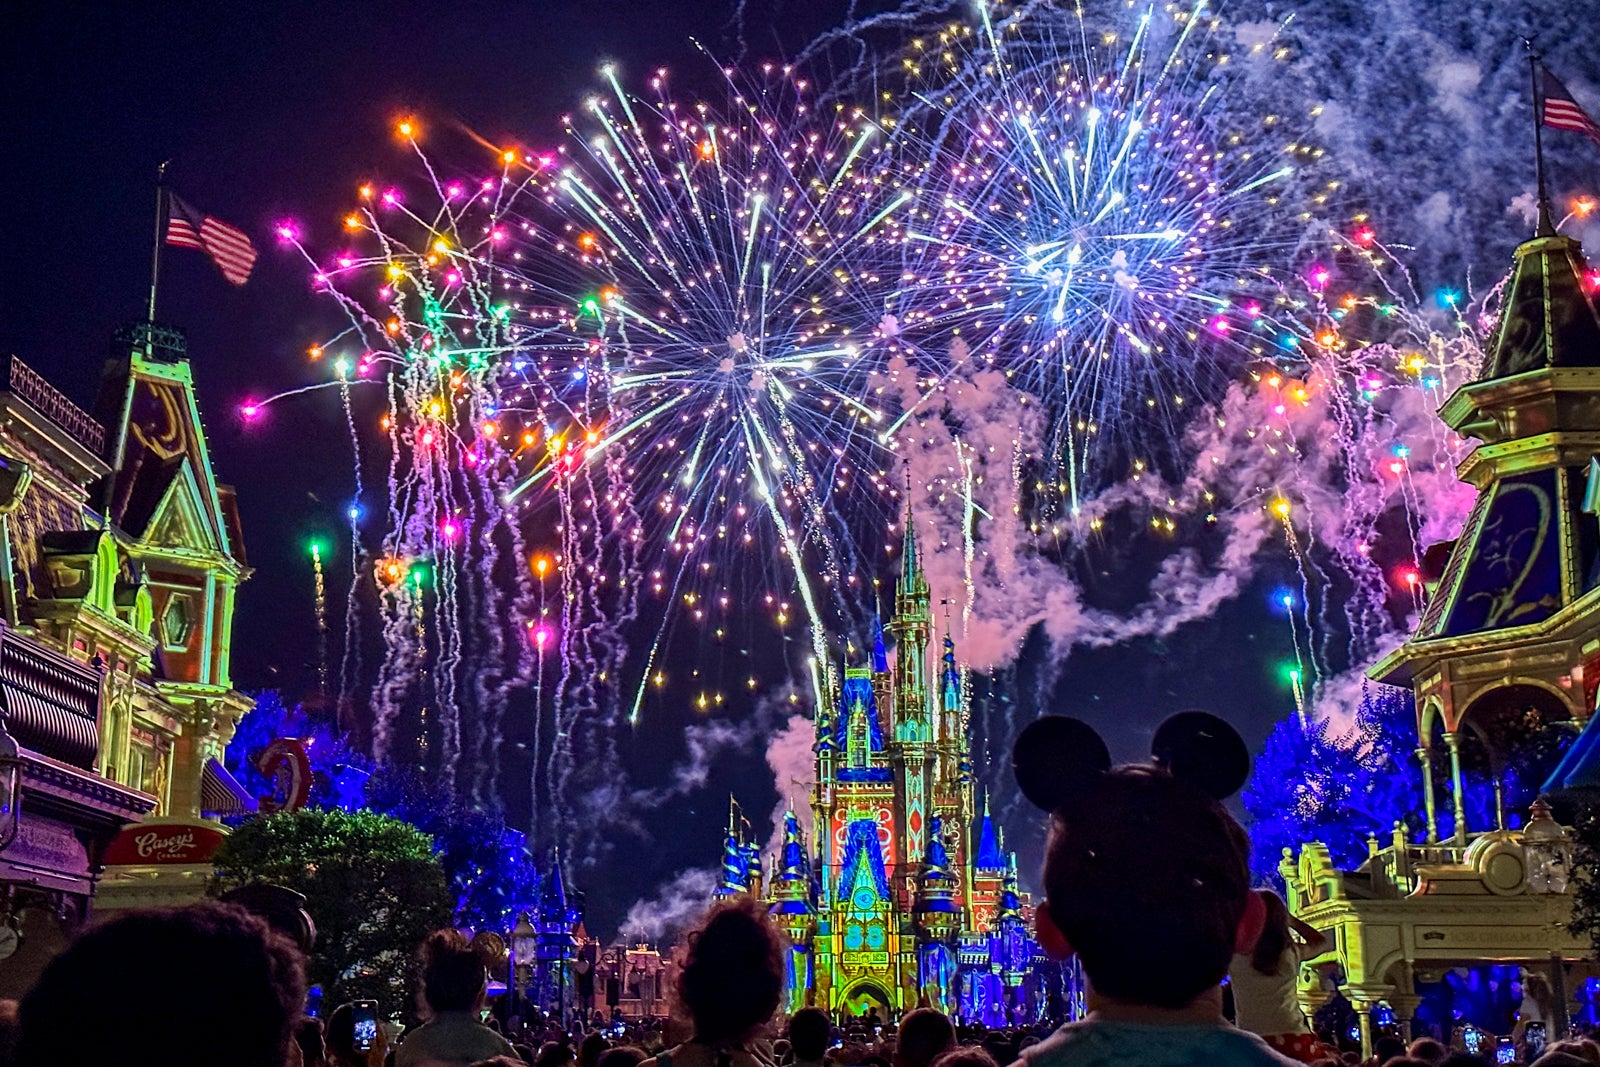 Disney’s $60 billion theme park investment will bring change ‘all over,’ says CEO Bob Iger